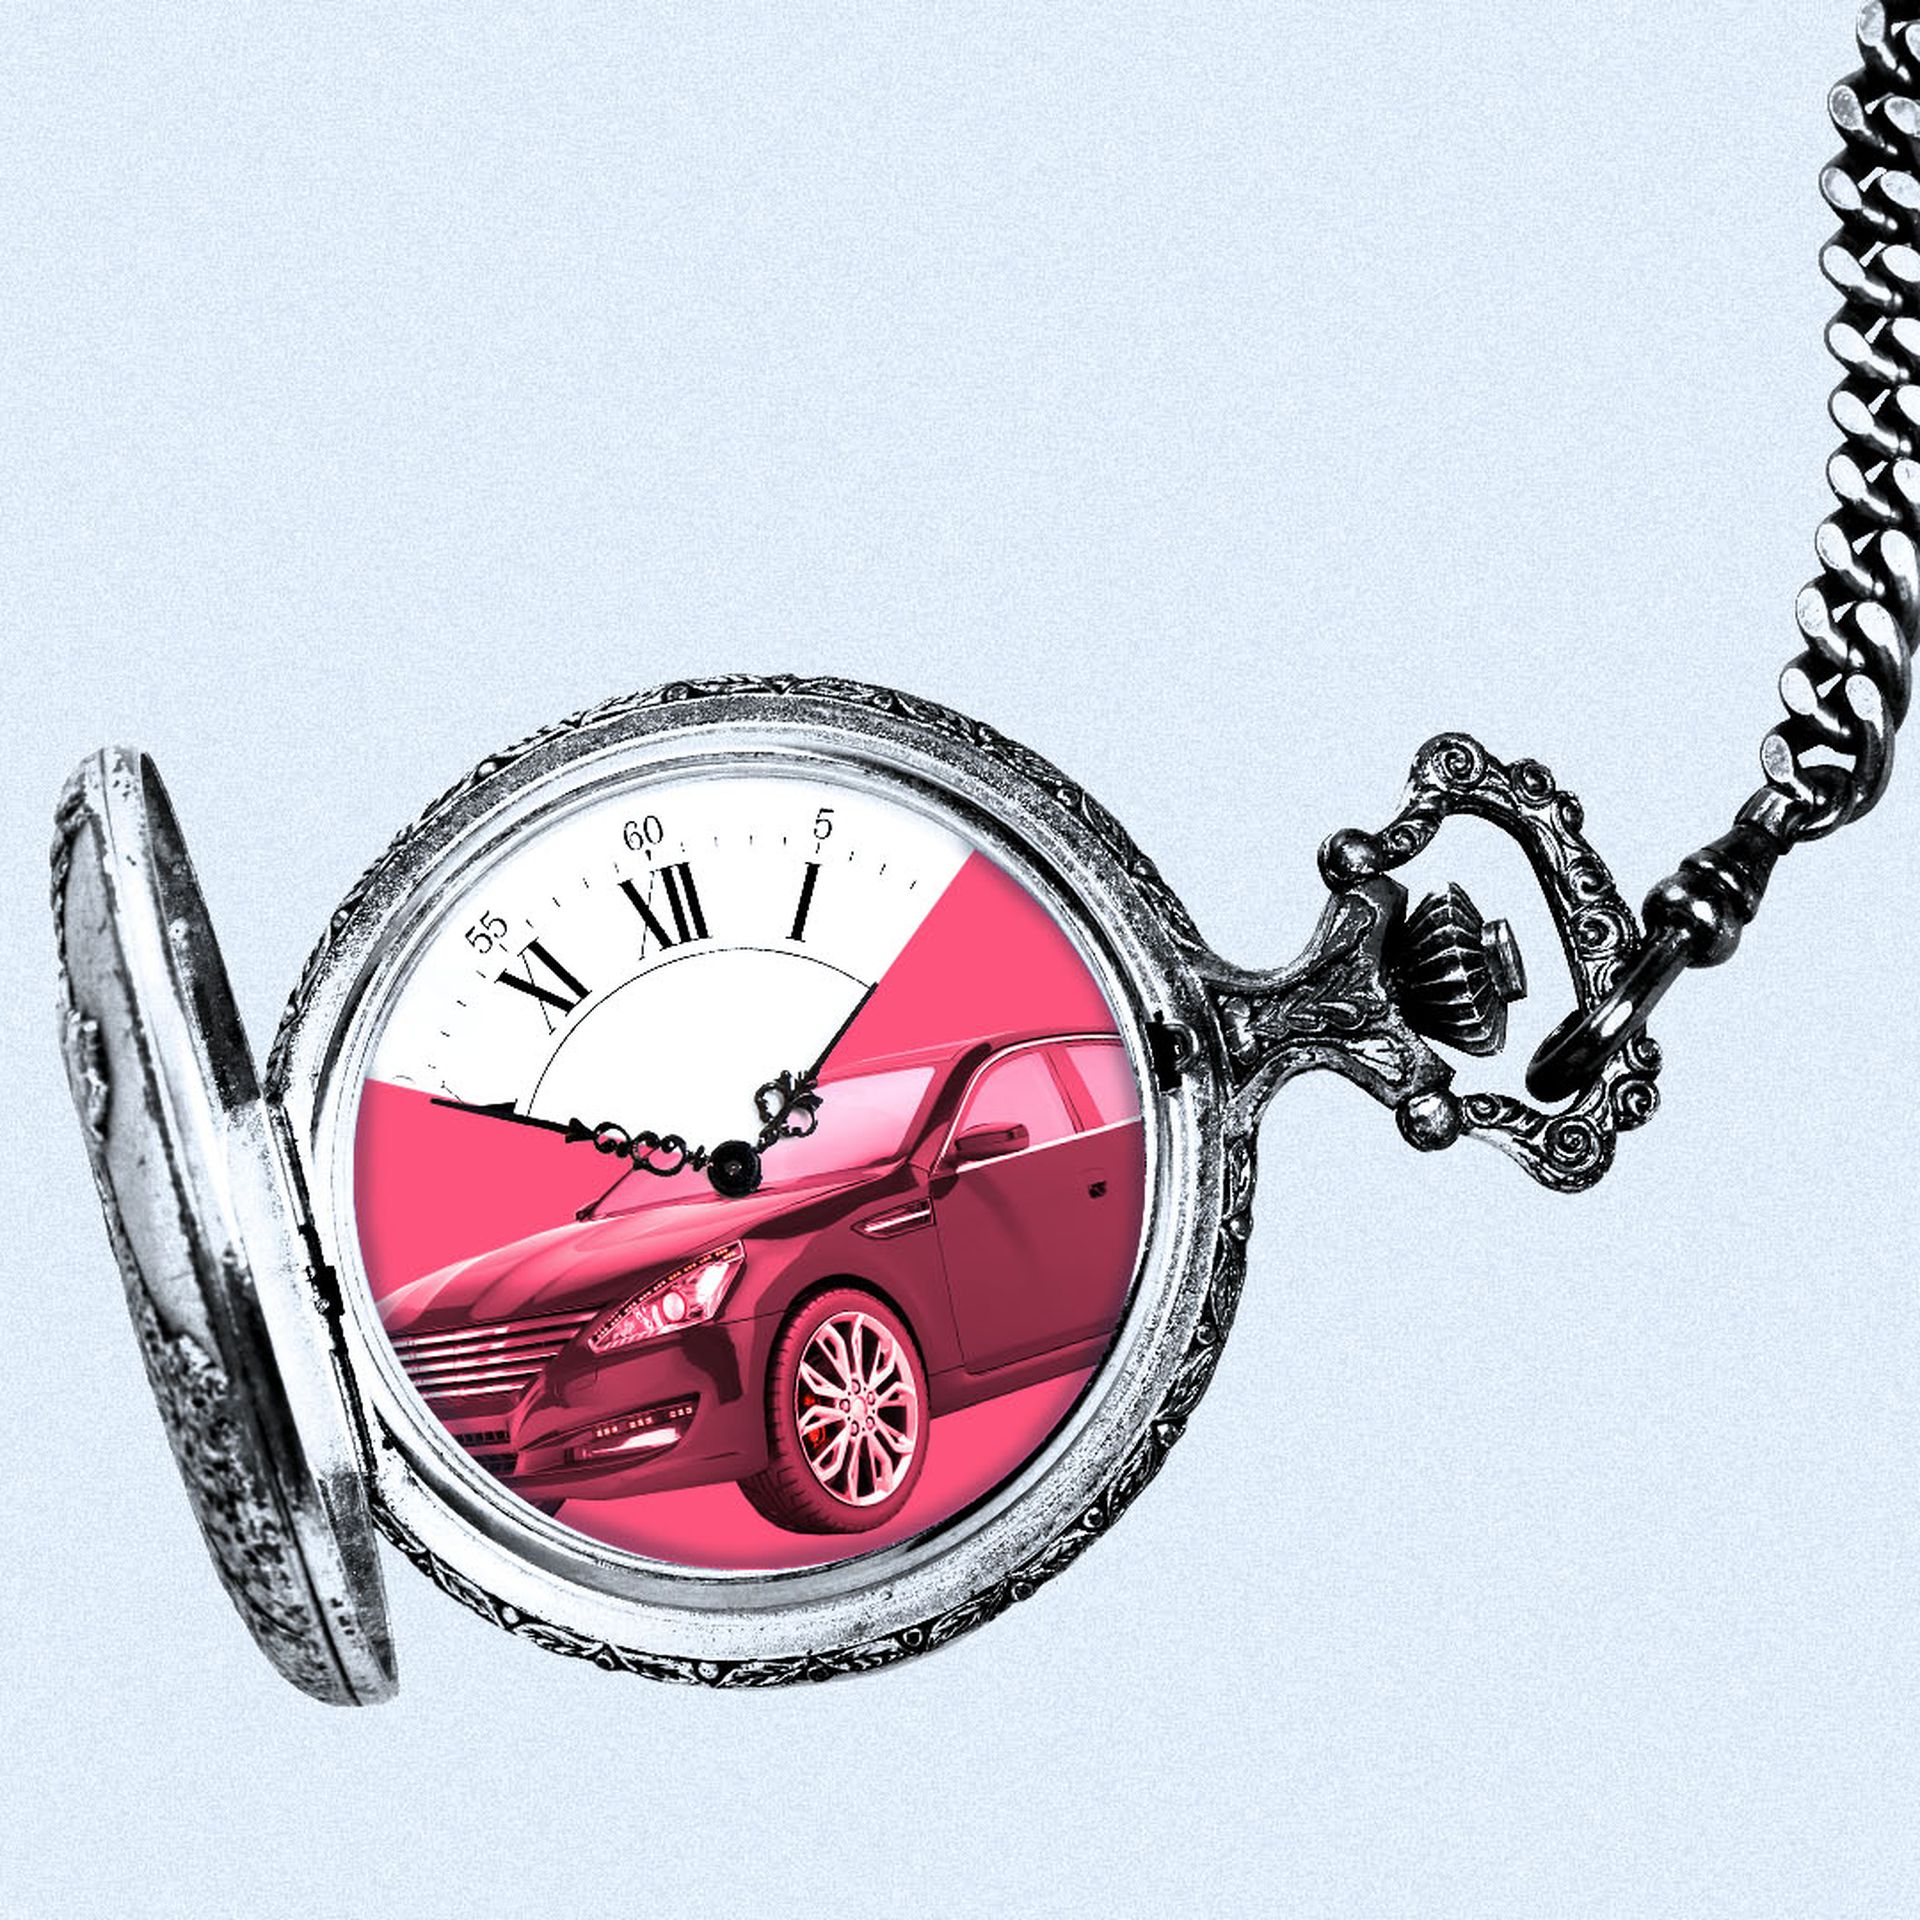 Illustration of a pocket watch with a car reflected in its face